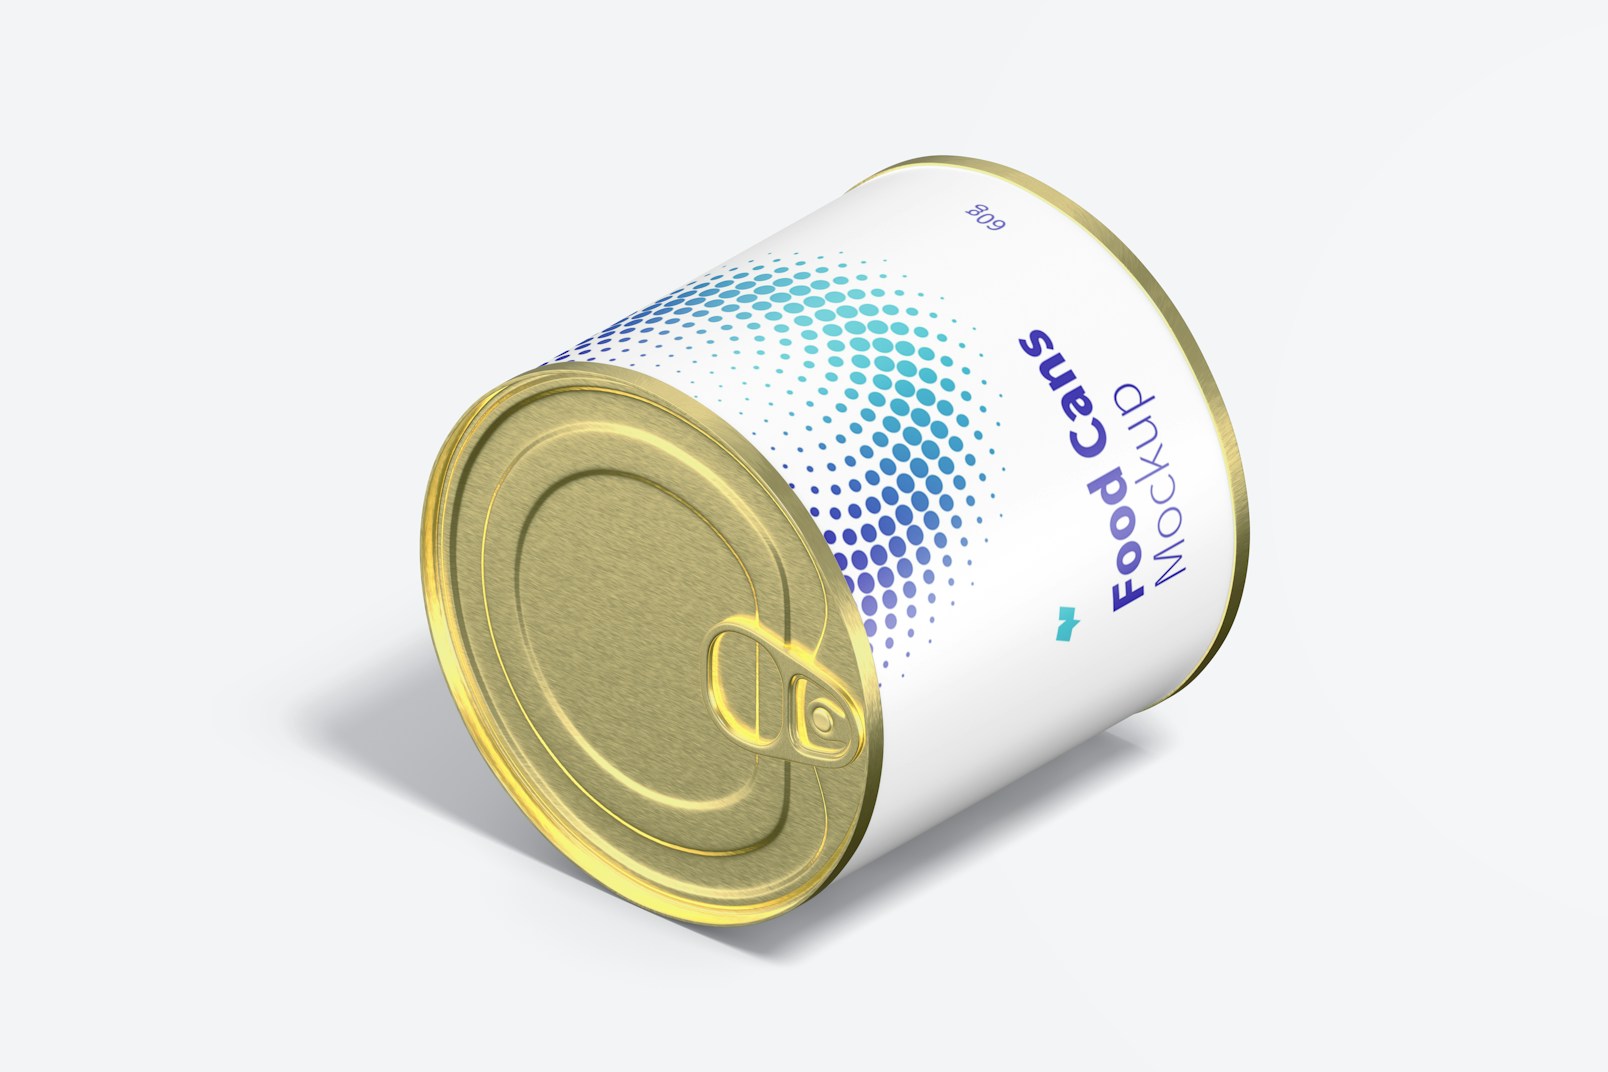 60g Food Can Mockup, Isometric Left View